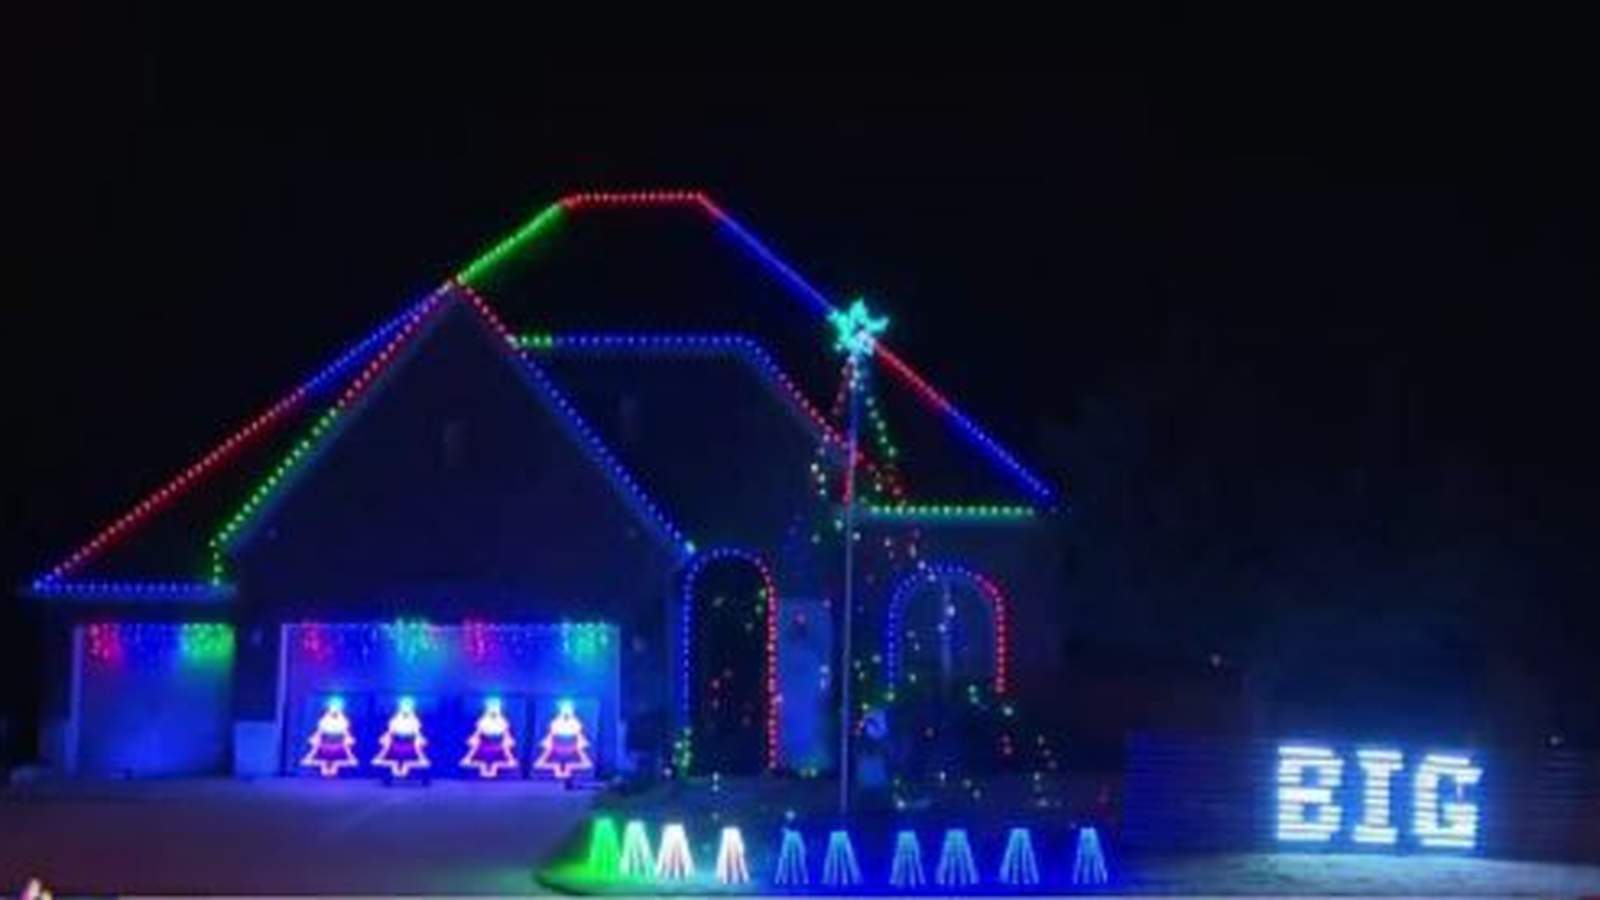 Local DJ’s Christmas lights show featuring Meg Thee Stallion’s song ‘Body’ goes viral